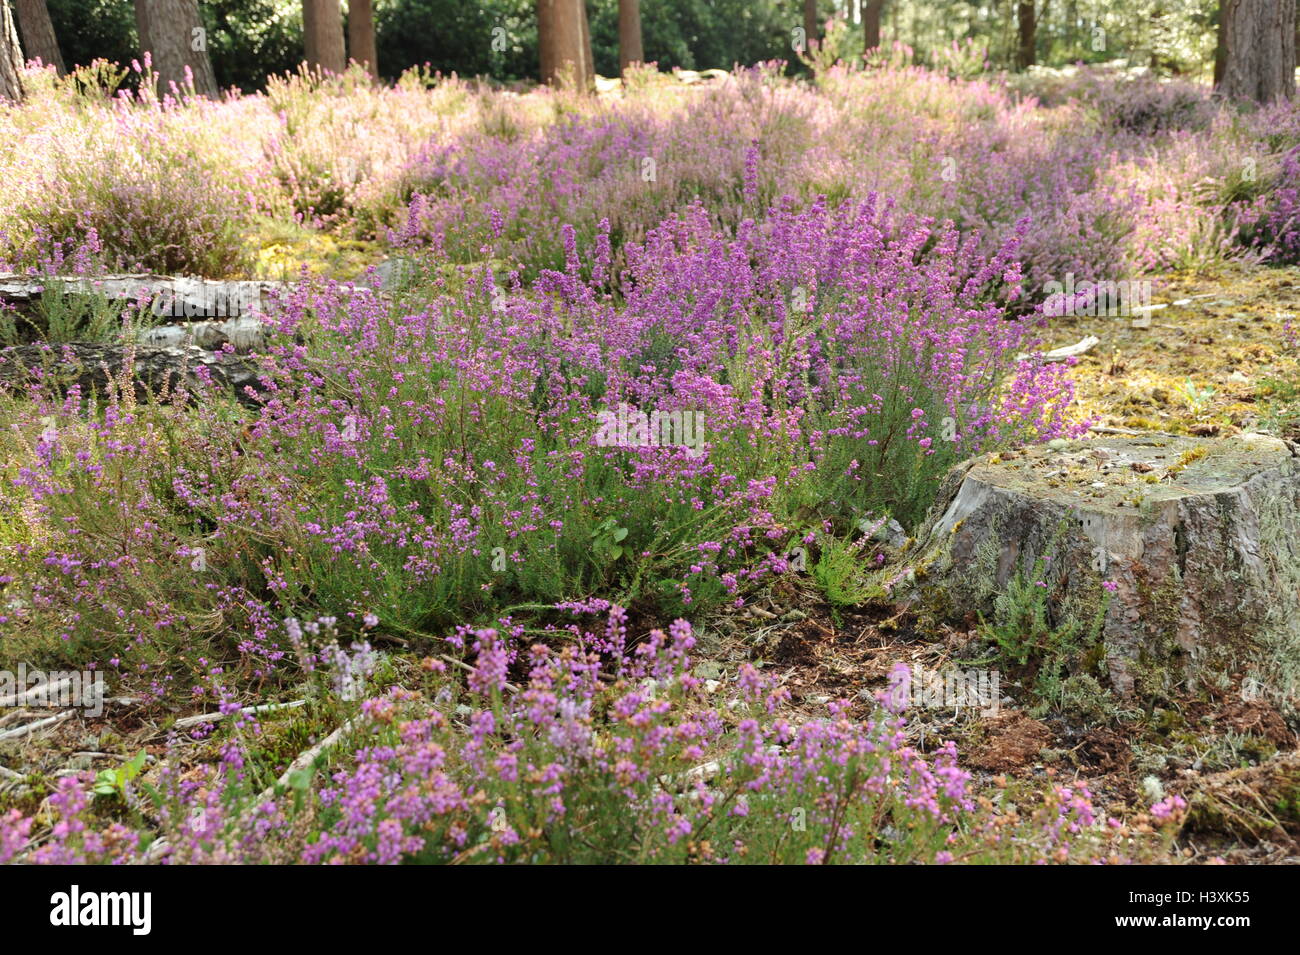 Pink flowering Heather with fungi growing on a tree stump in the fore-ground Stock Photo